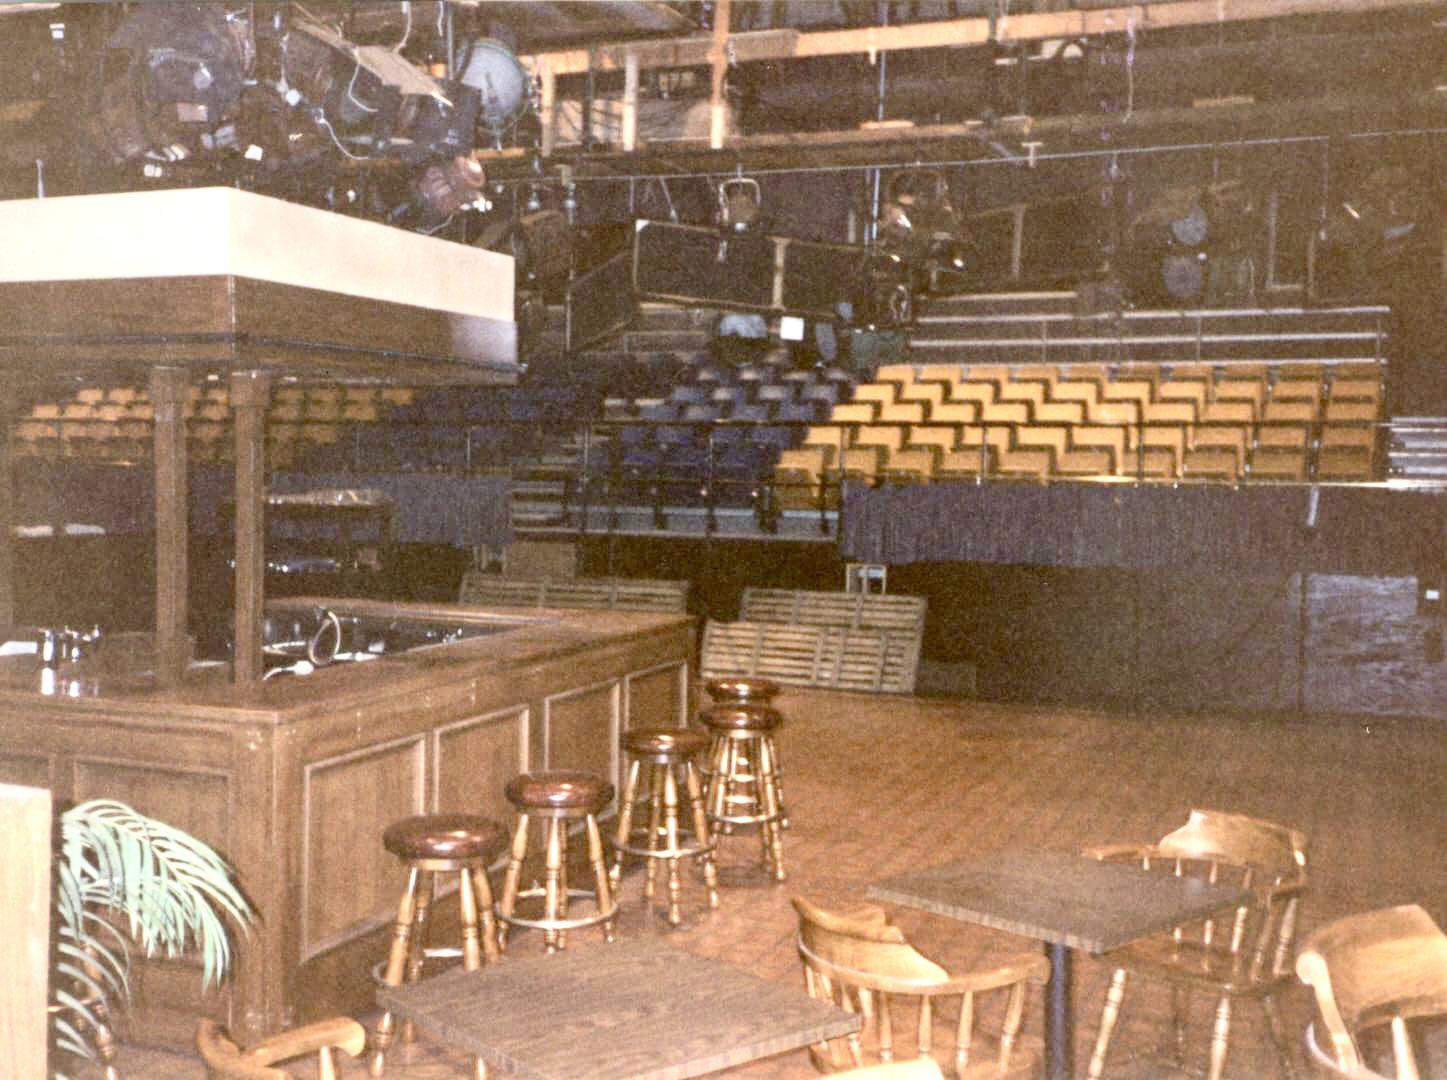 The set of “Cheers” from the actor’s perspective